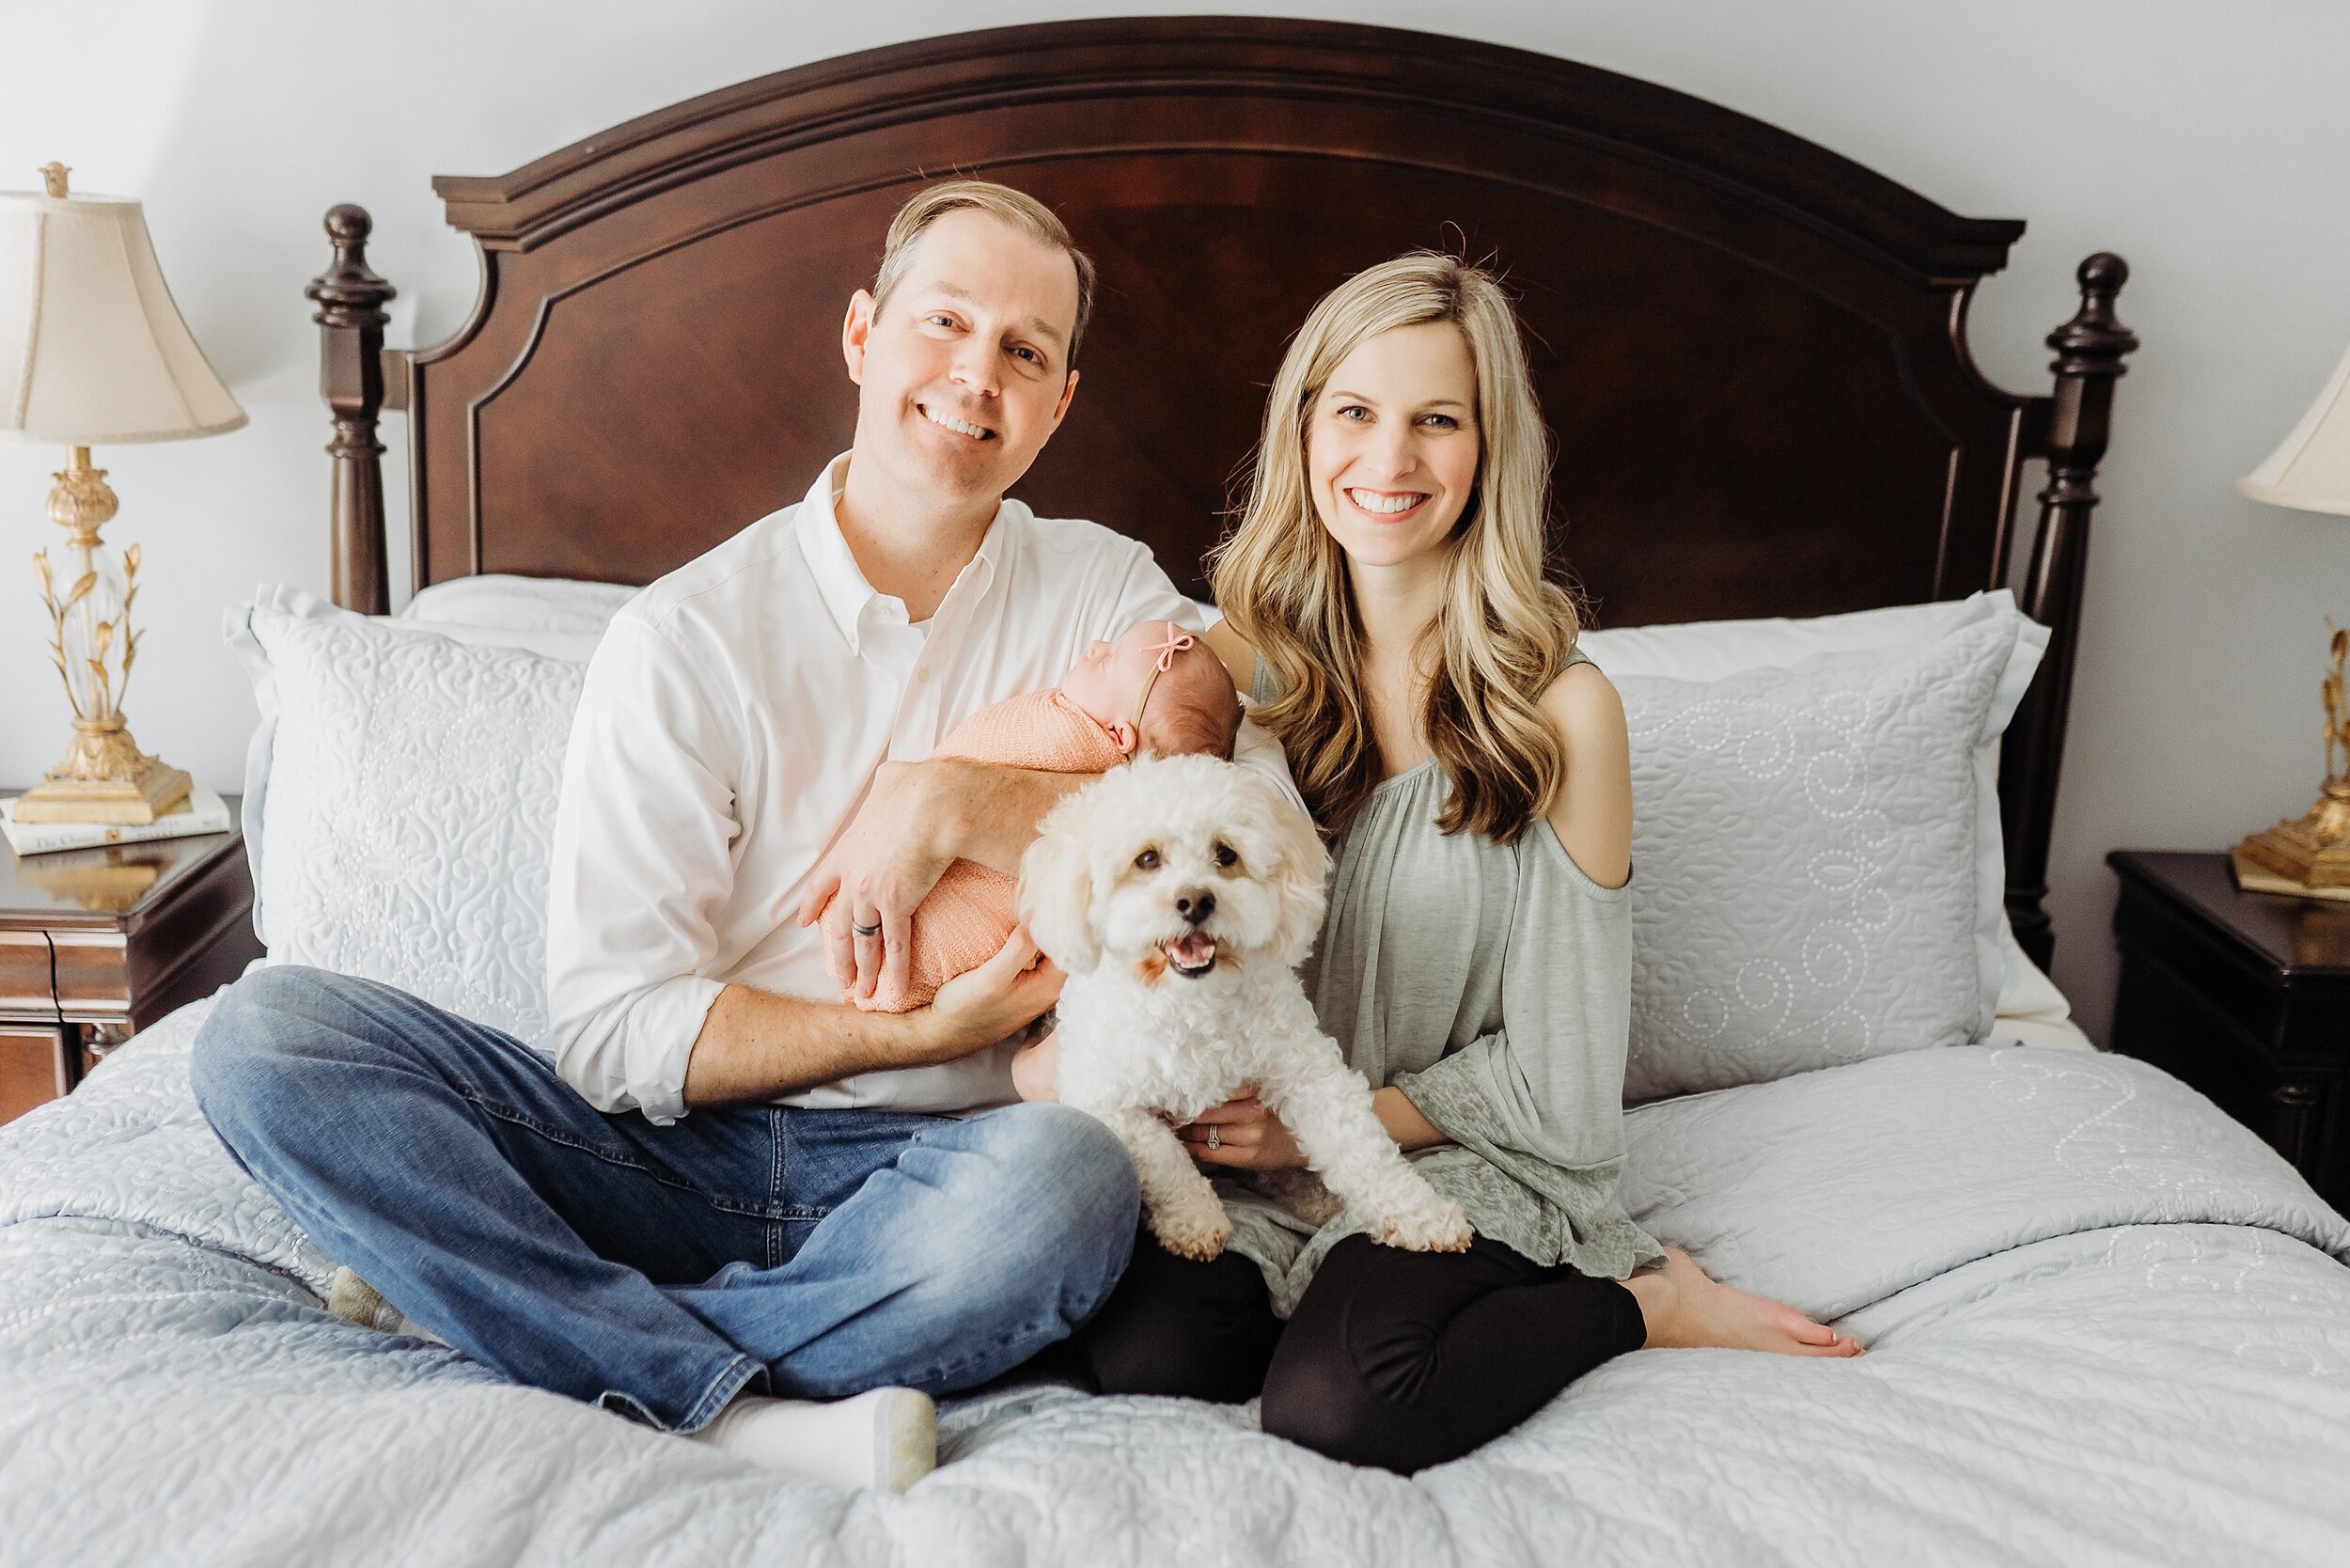 Family of 3 on master bed at in-home newborn session in Atlanta, GA